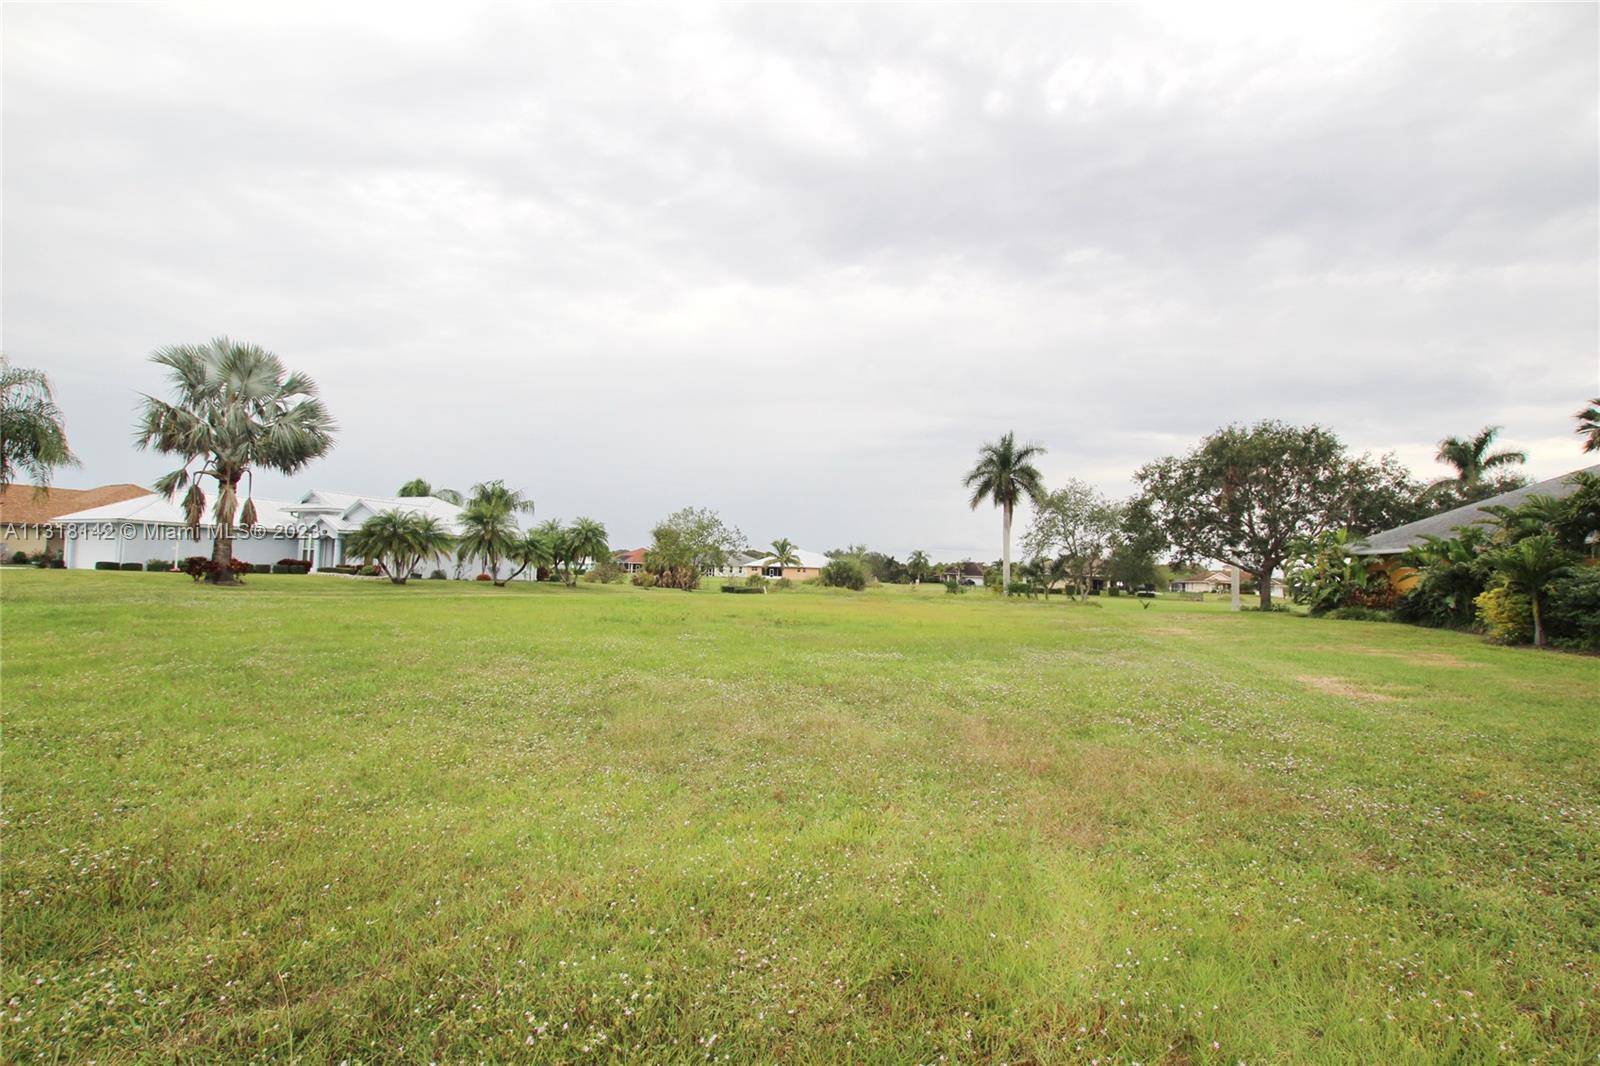 Fantastic opportunity to build your new home in Okeechobee.